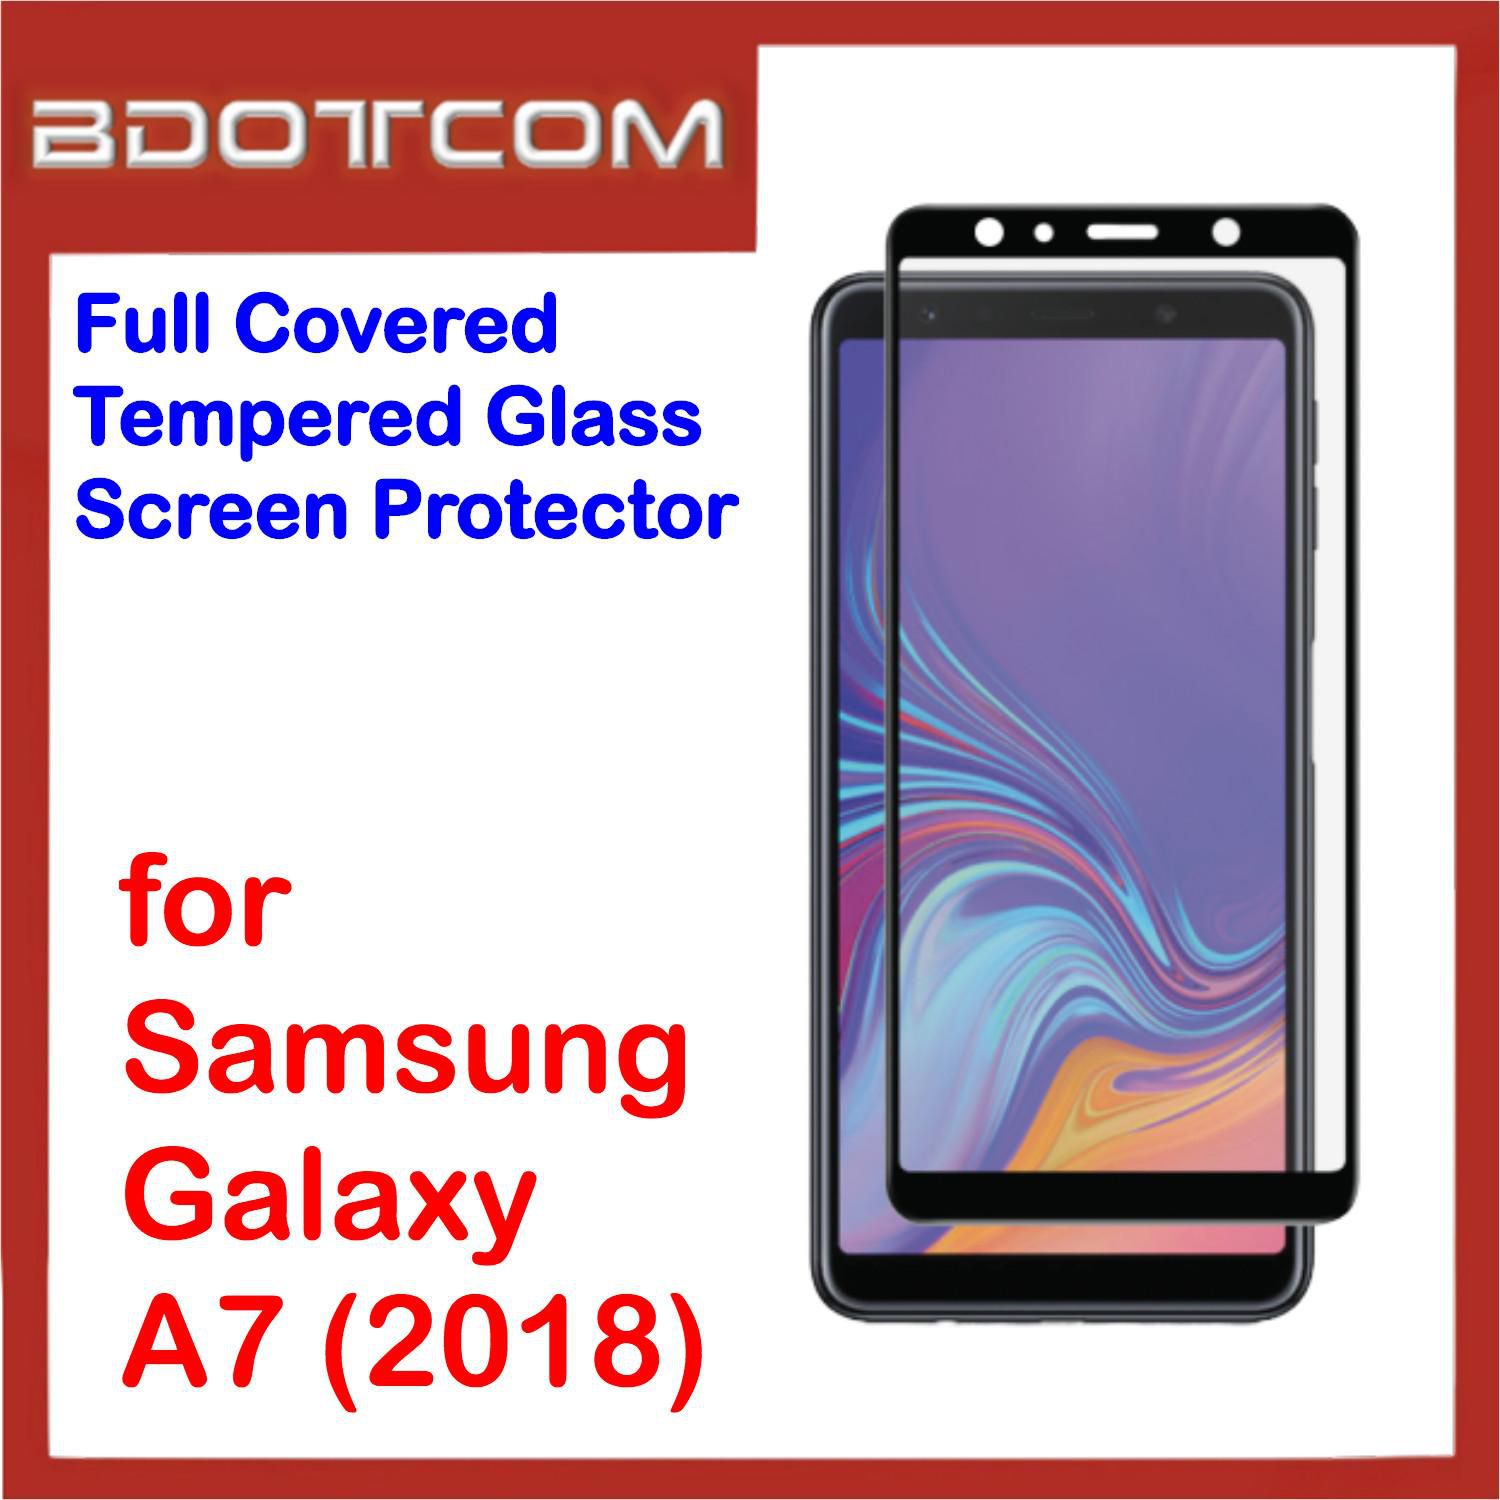 Bdotcom Full Covered Tempered Glass Screen Protector for Samsung A7 2018 (Black)